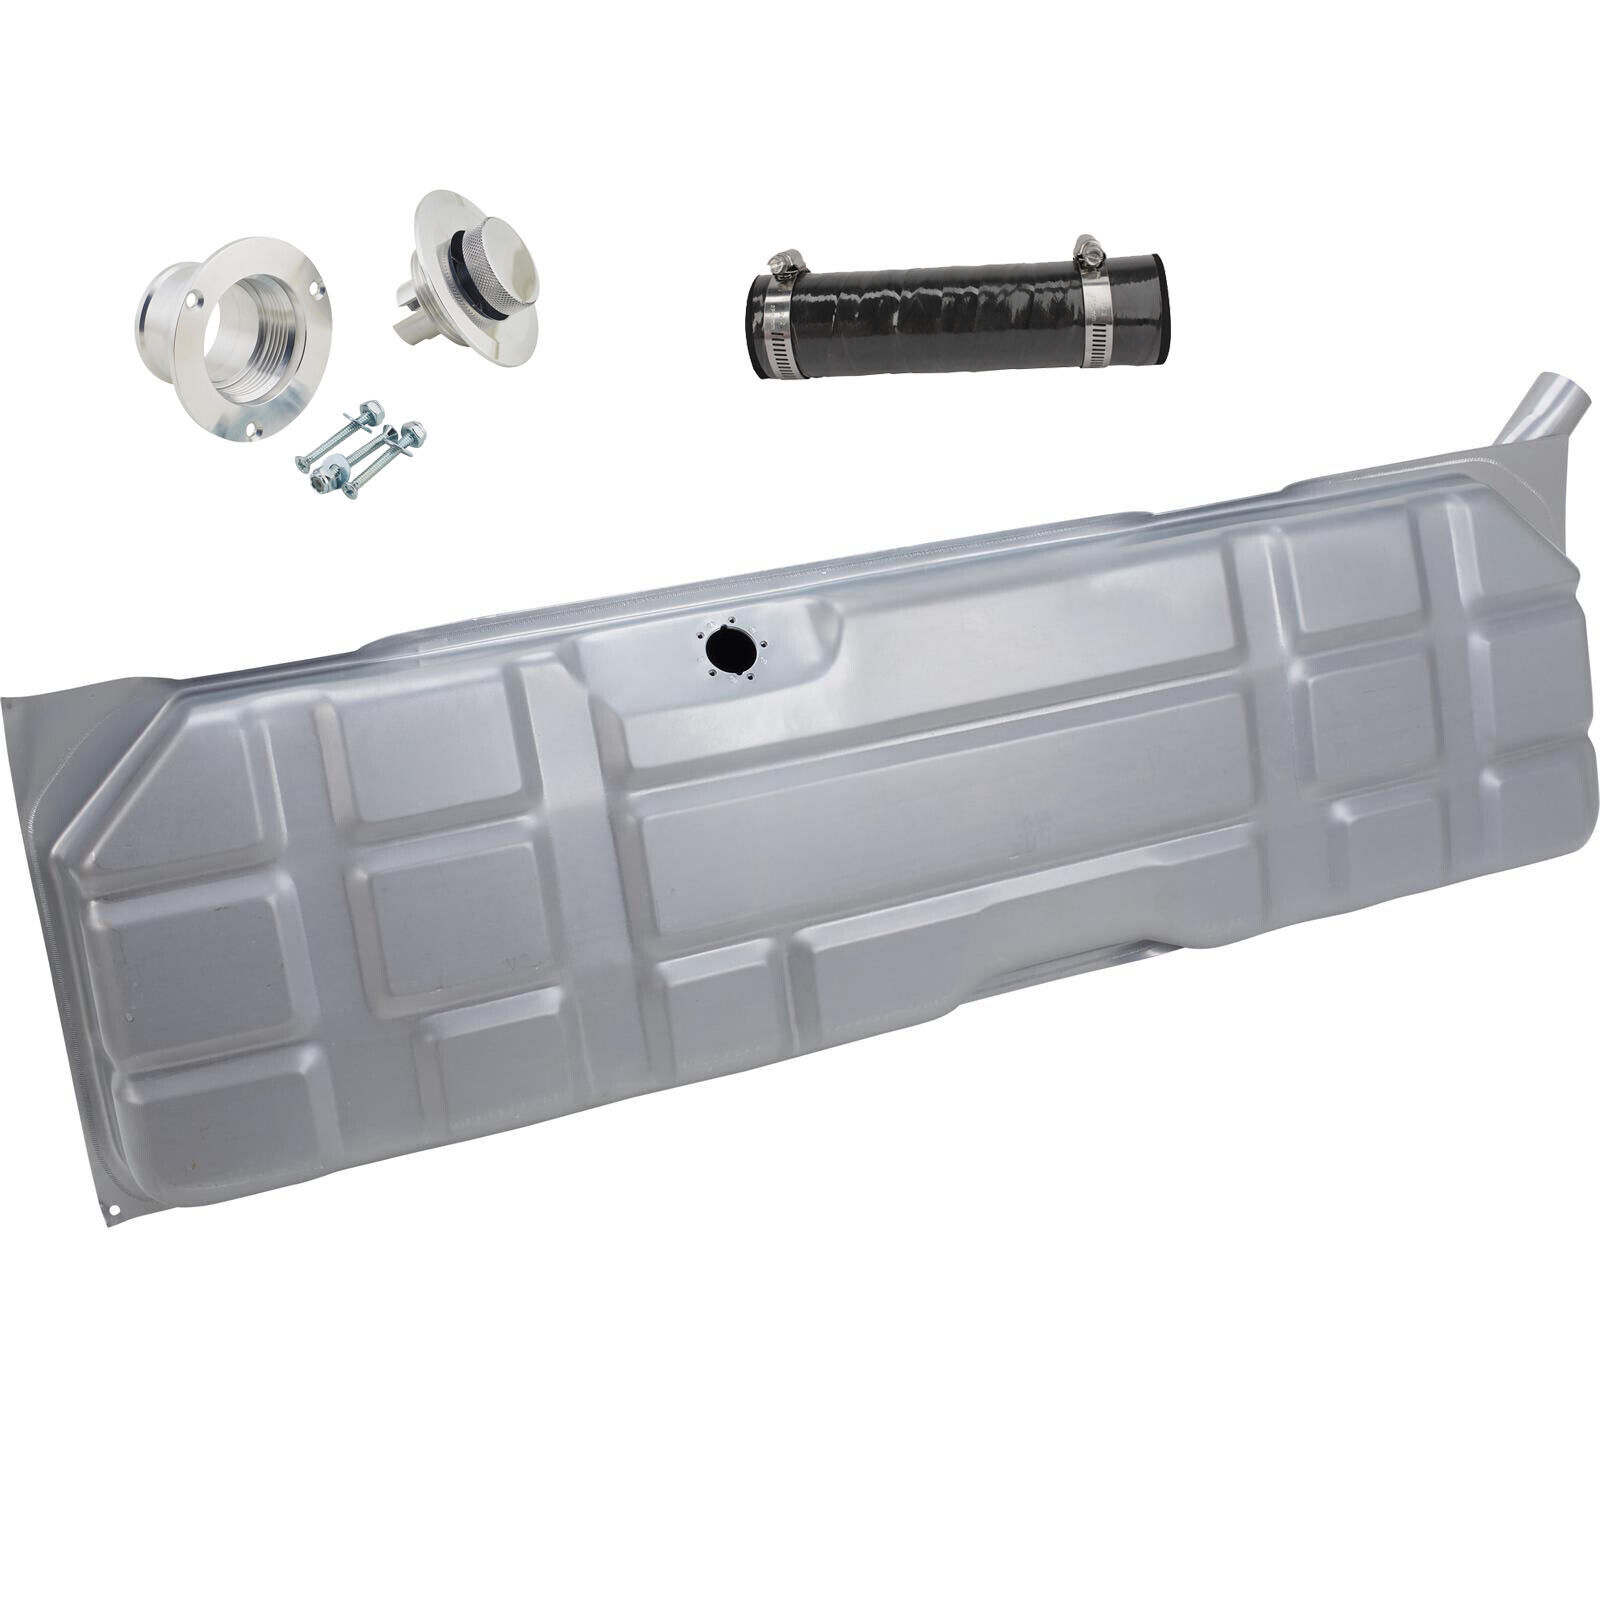 OEM Replacement Fuel Tank, 18 Gallon w/Cap, fits 1960-66 Chevy C10